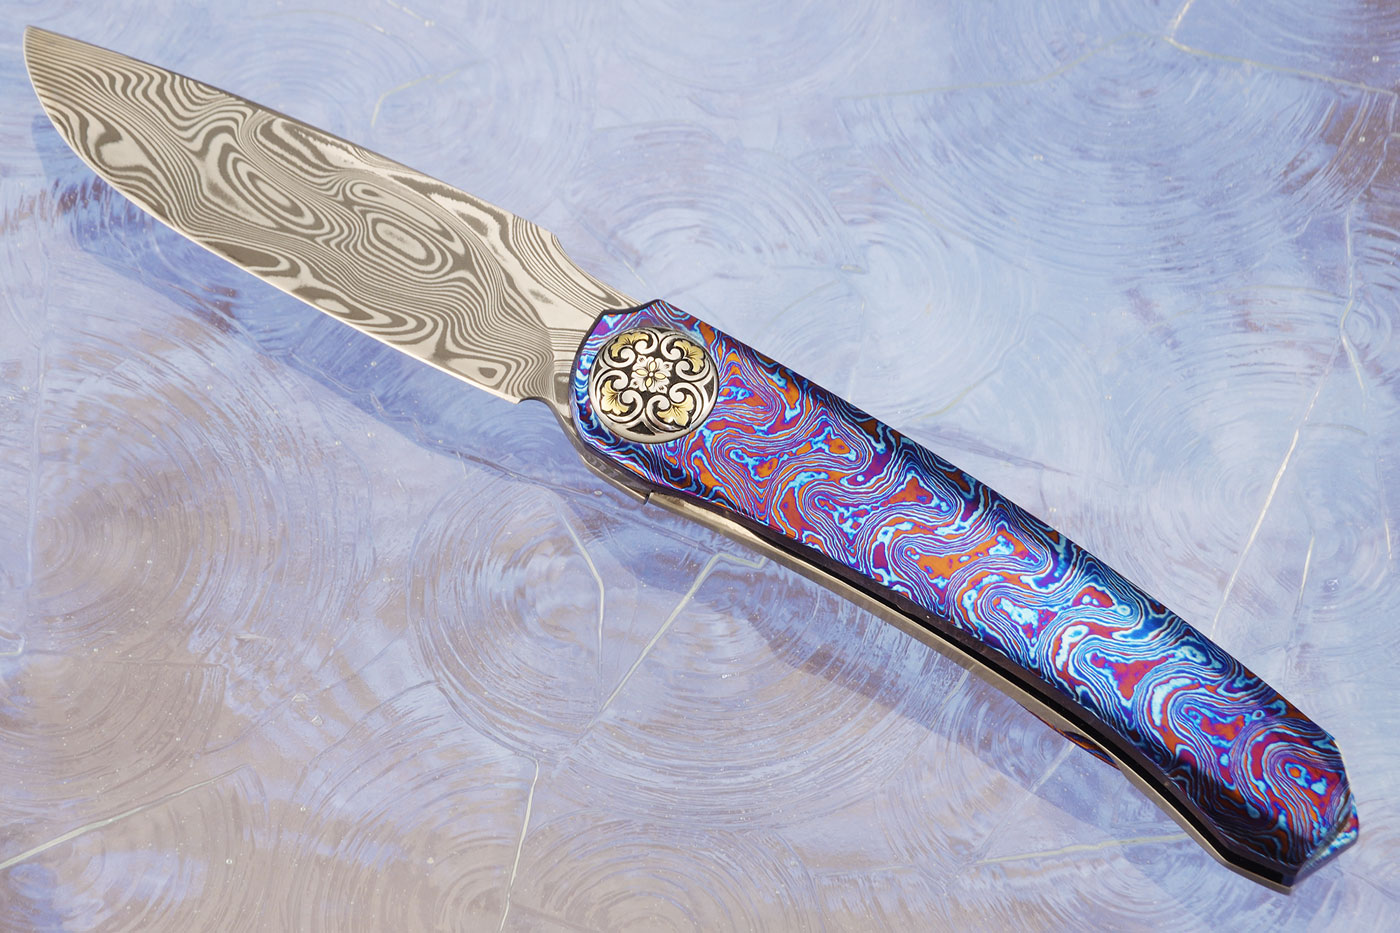 Engraved Boudicca Full Dress Front Flipper with Damasteel and Timascus (Ceramic IKBS)